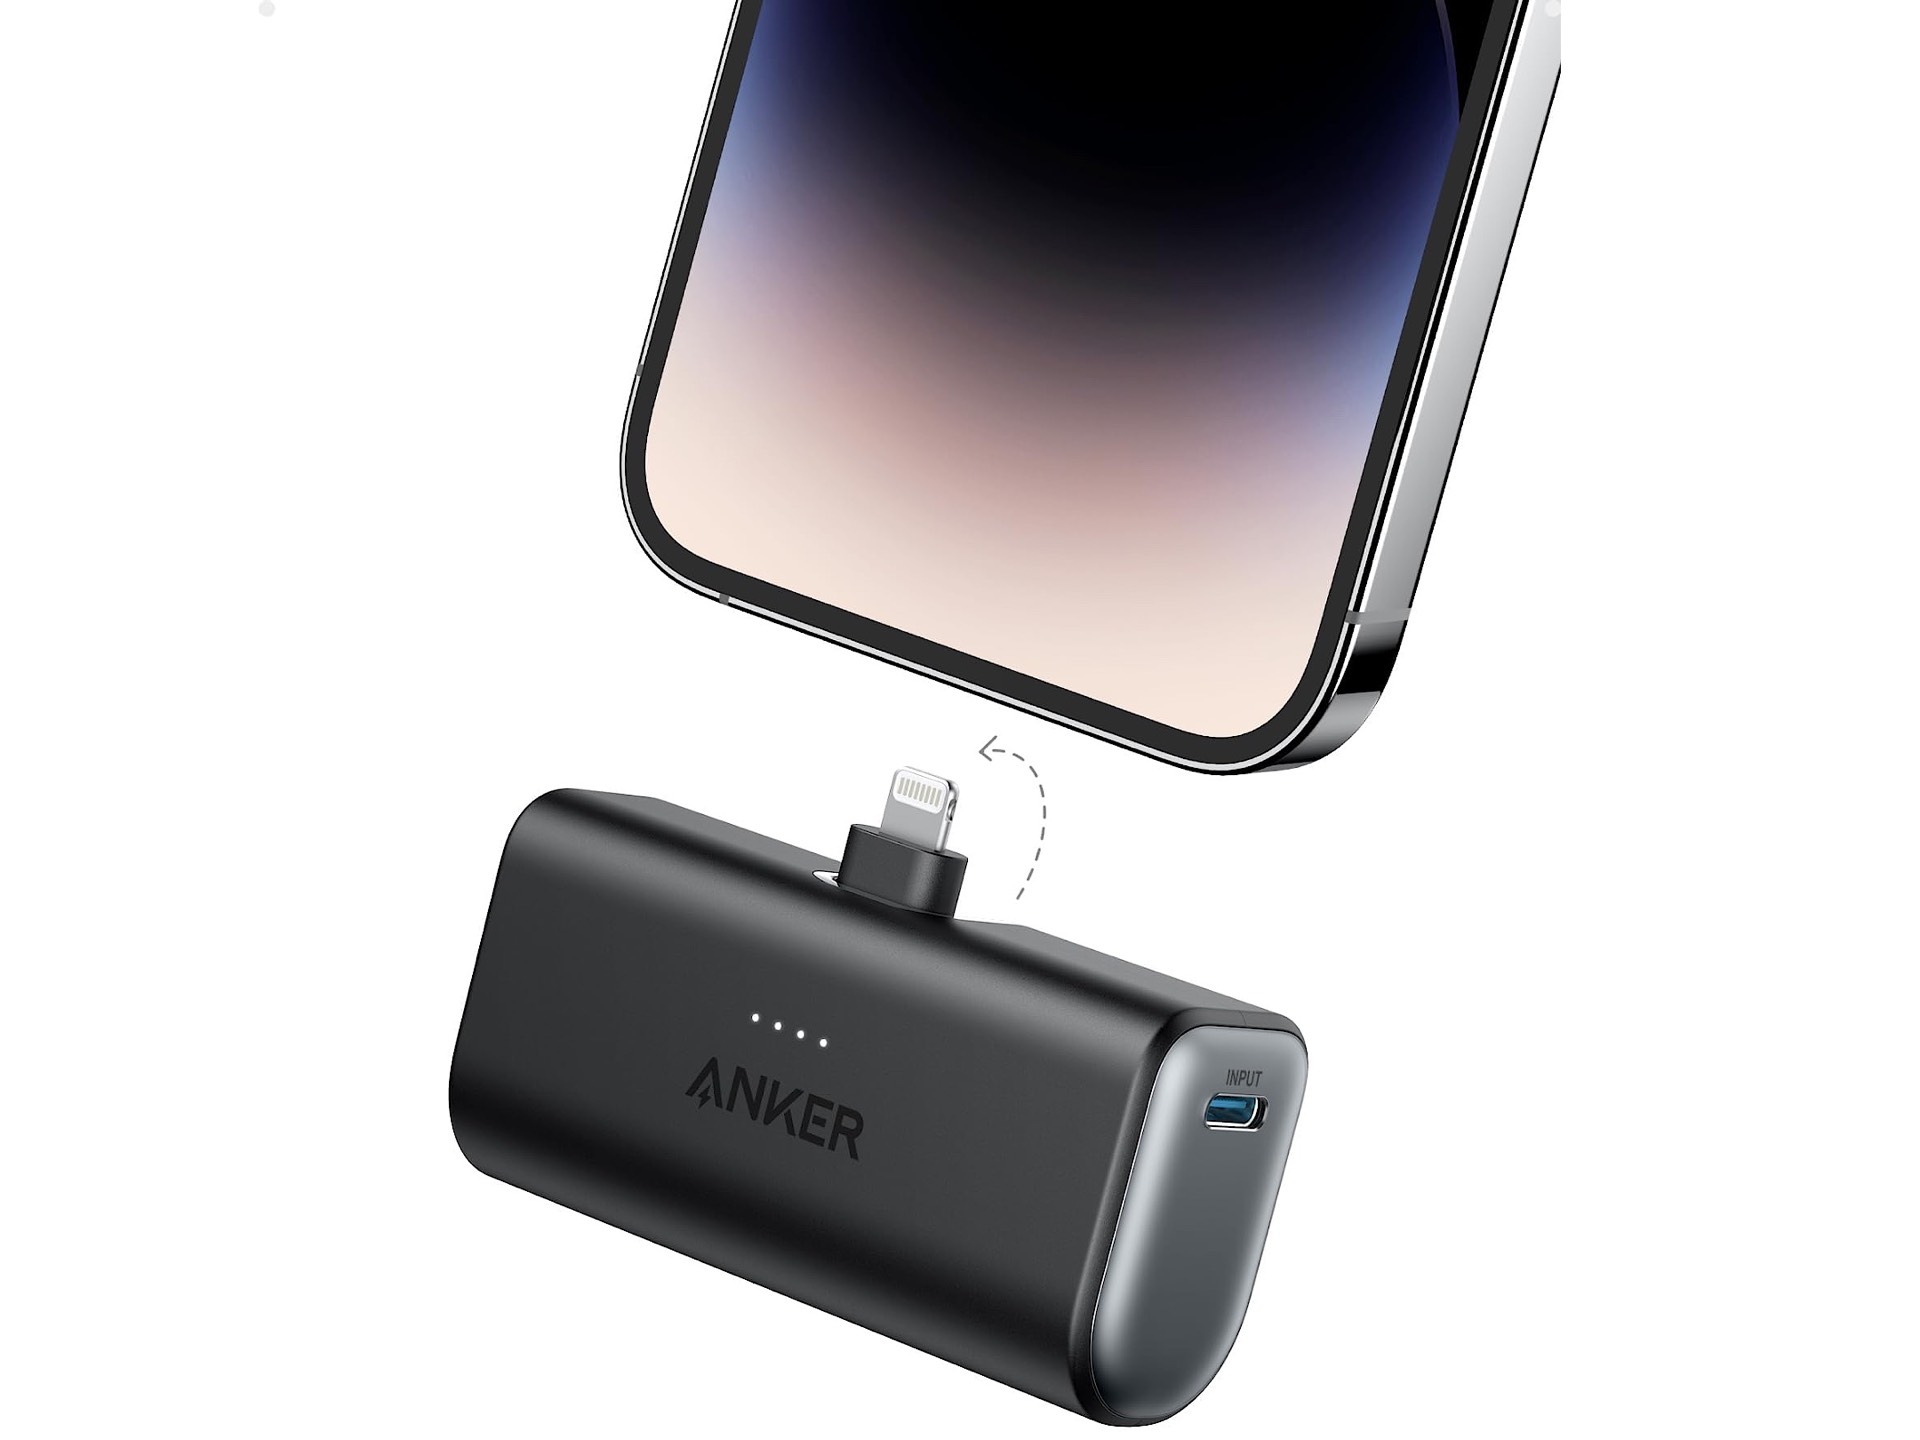 anker-nano-5000mah-power-bank-with-built-in-lightning-connector